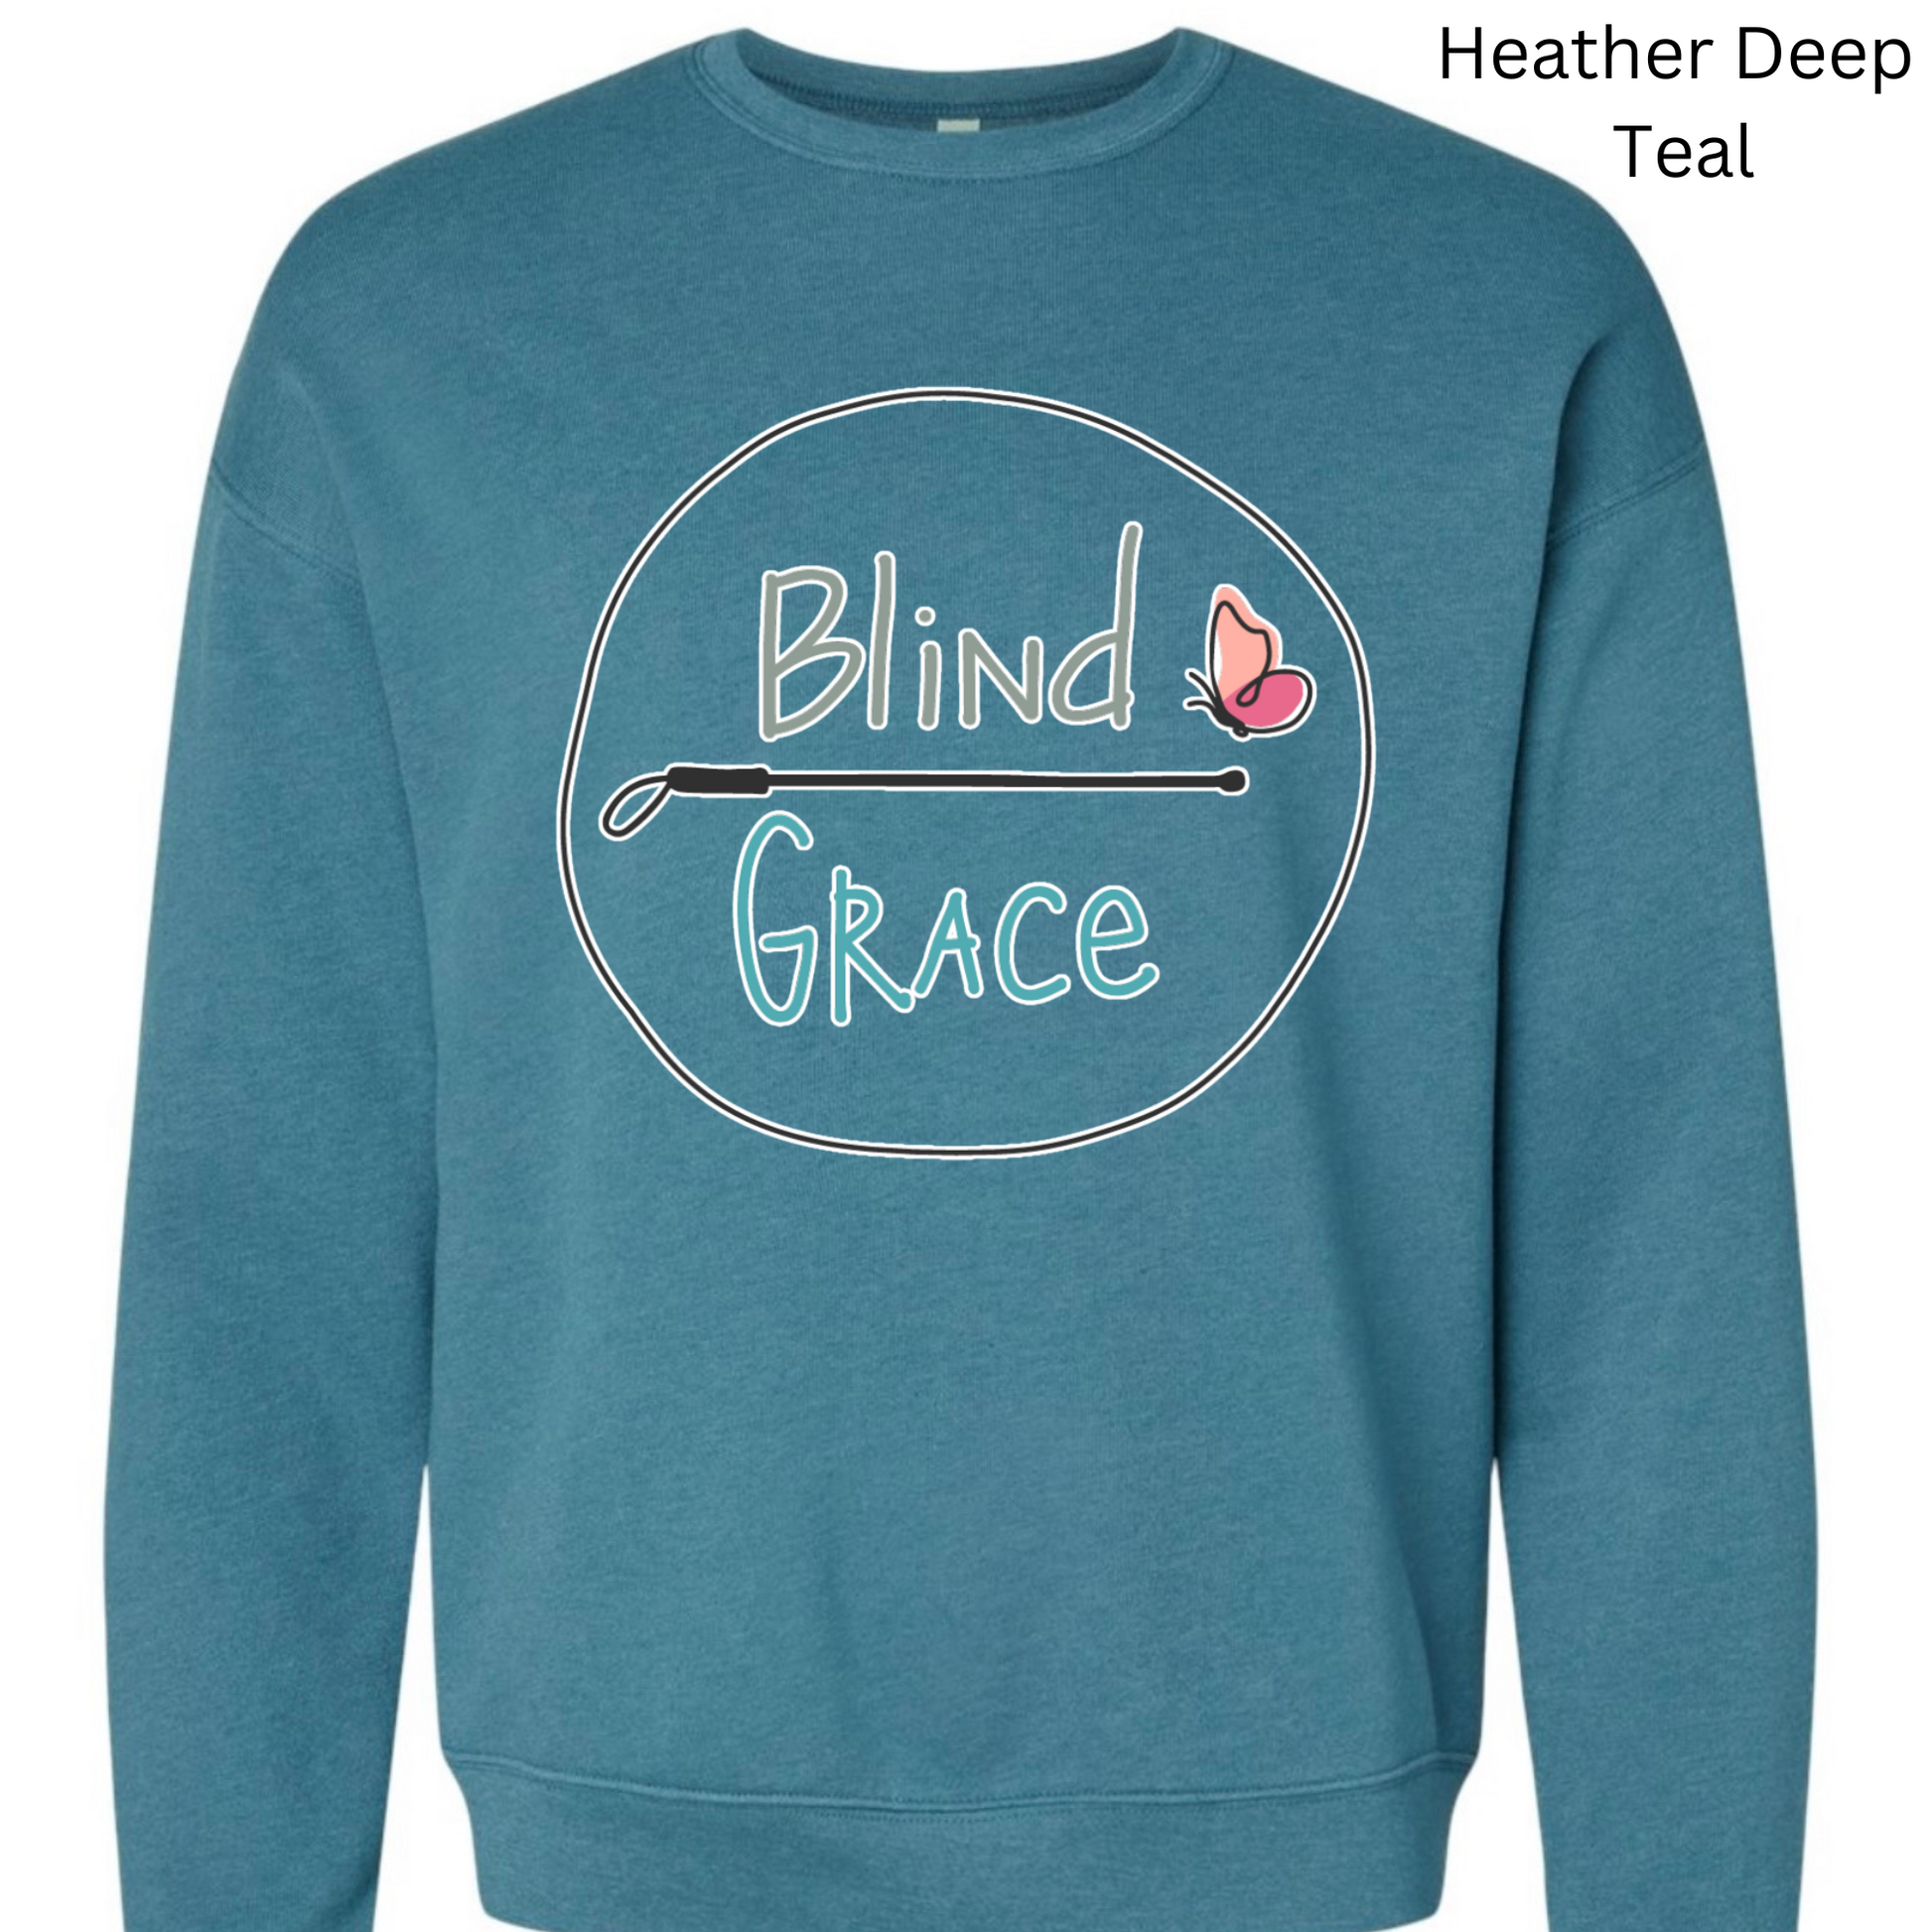 Heather deep teal crewneck sweatshirt with the original blind Grace logo (blind in olive green over a cane with Grace in turquoise and a pink and peach butterfly) outlined in white 